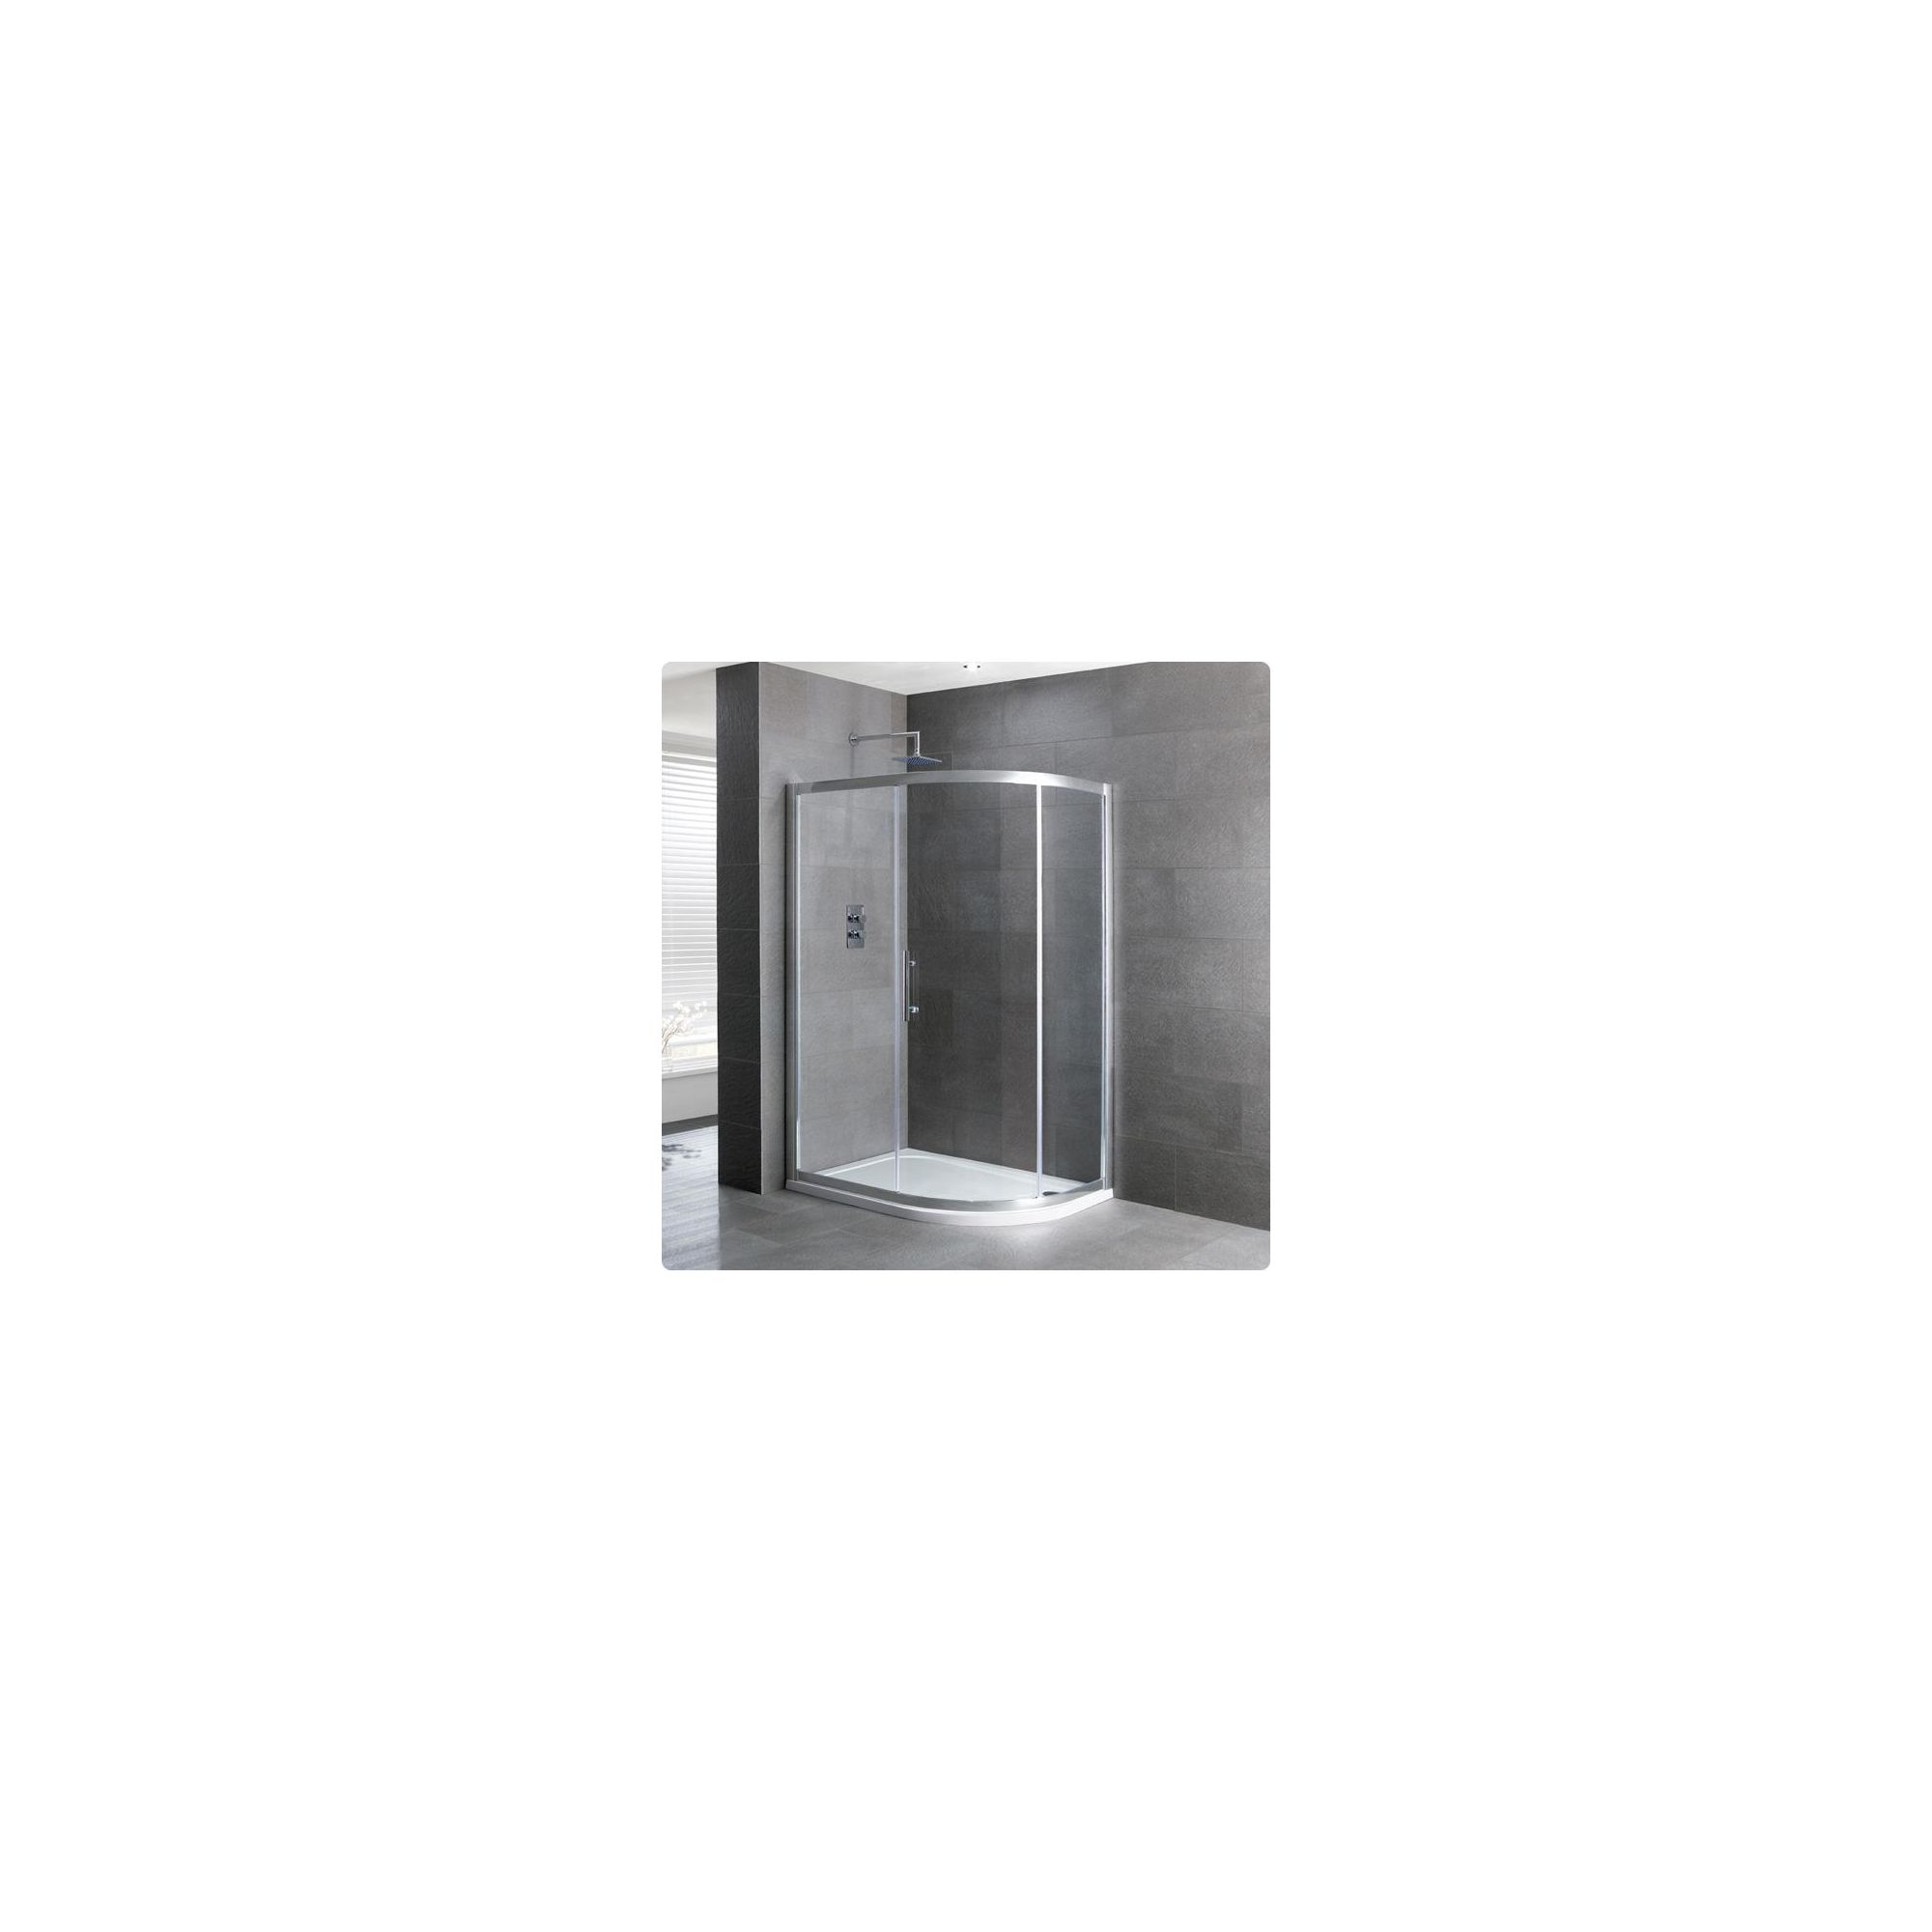 Duchy Select Silver 1 Door Offset Quadrant Shower Enclosure 1200mm x 900mm, Standard Tray, 6mm Glass at Tescos Direct